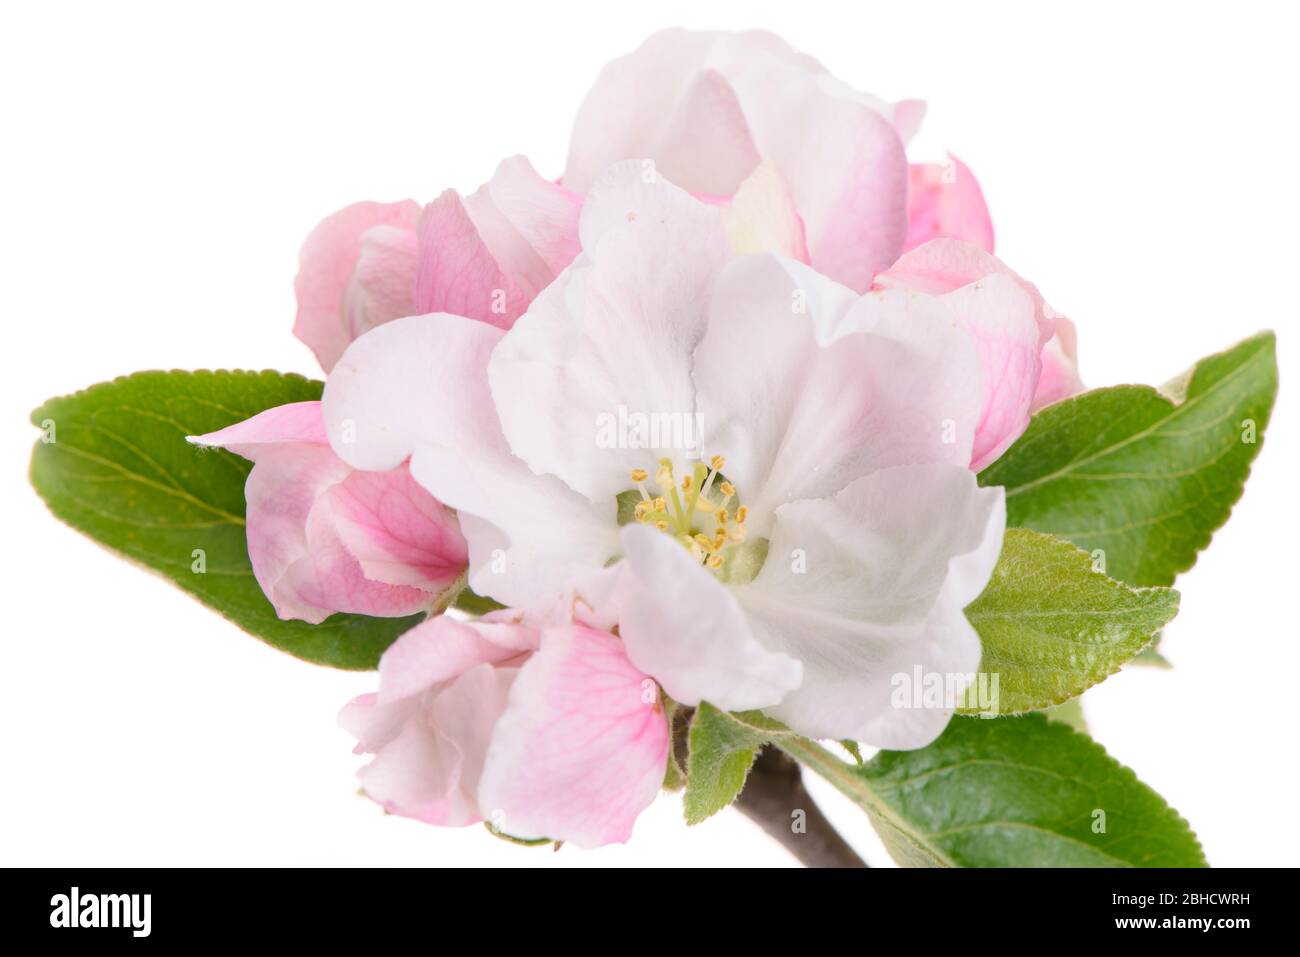 blooming blossoms of apple tree isolated over white background Stock Photo